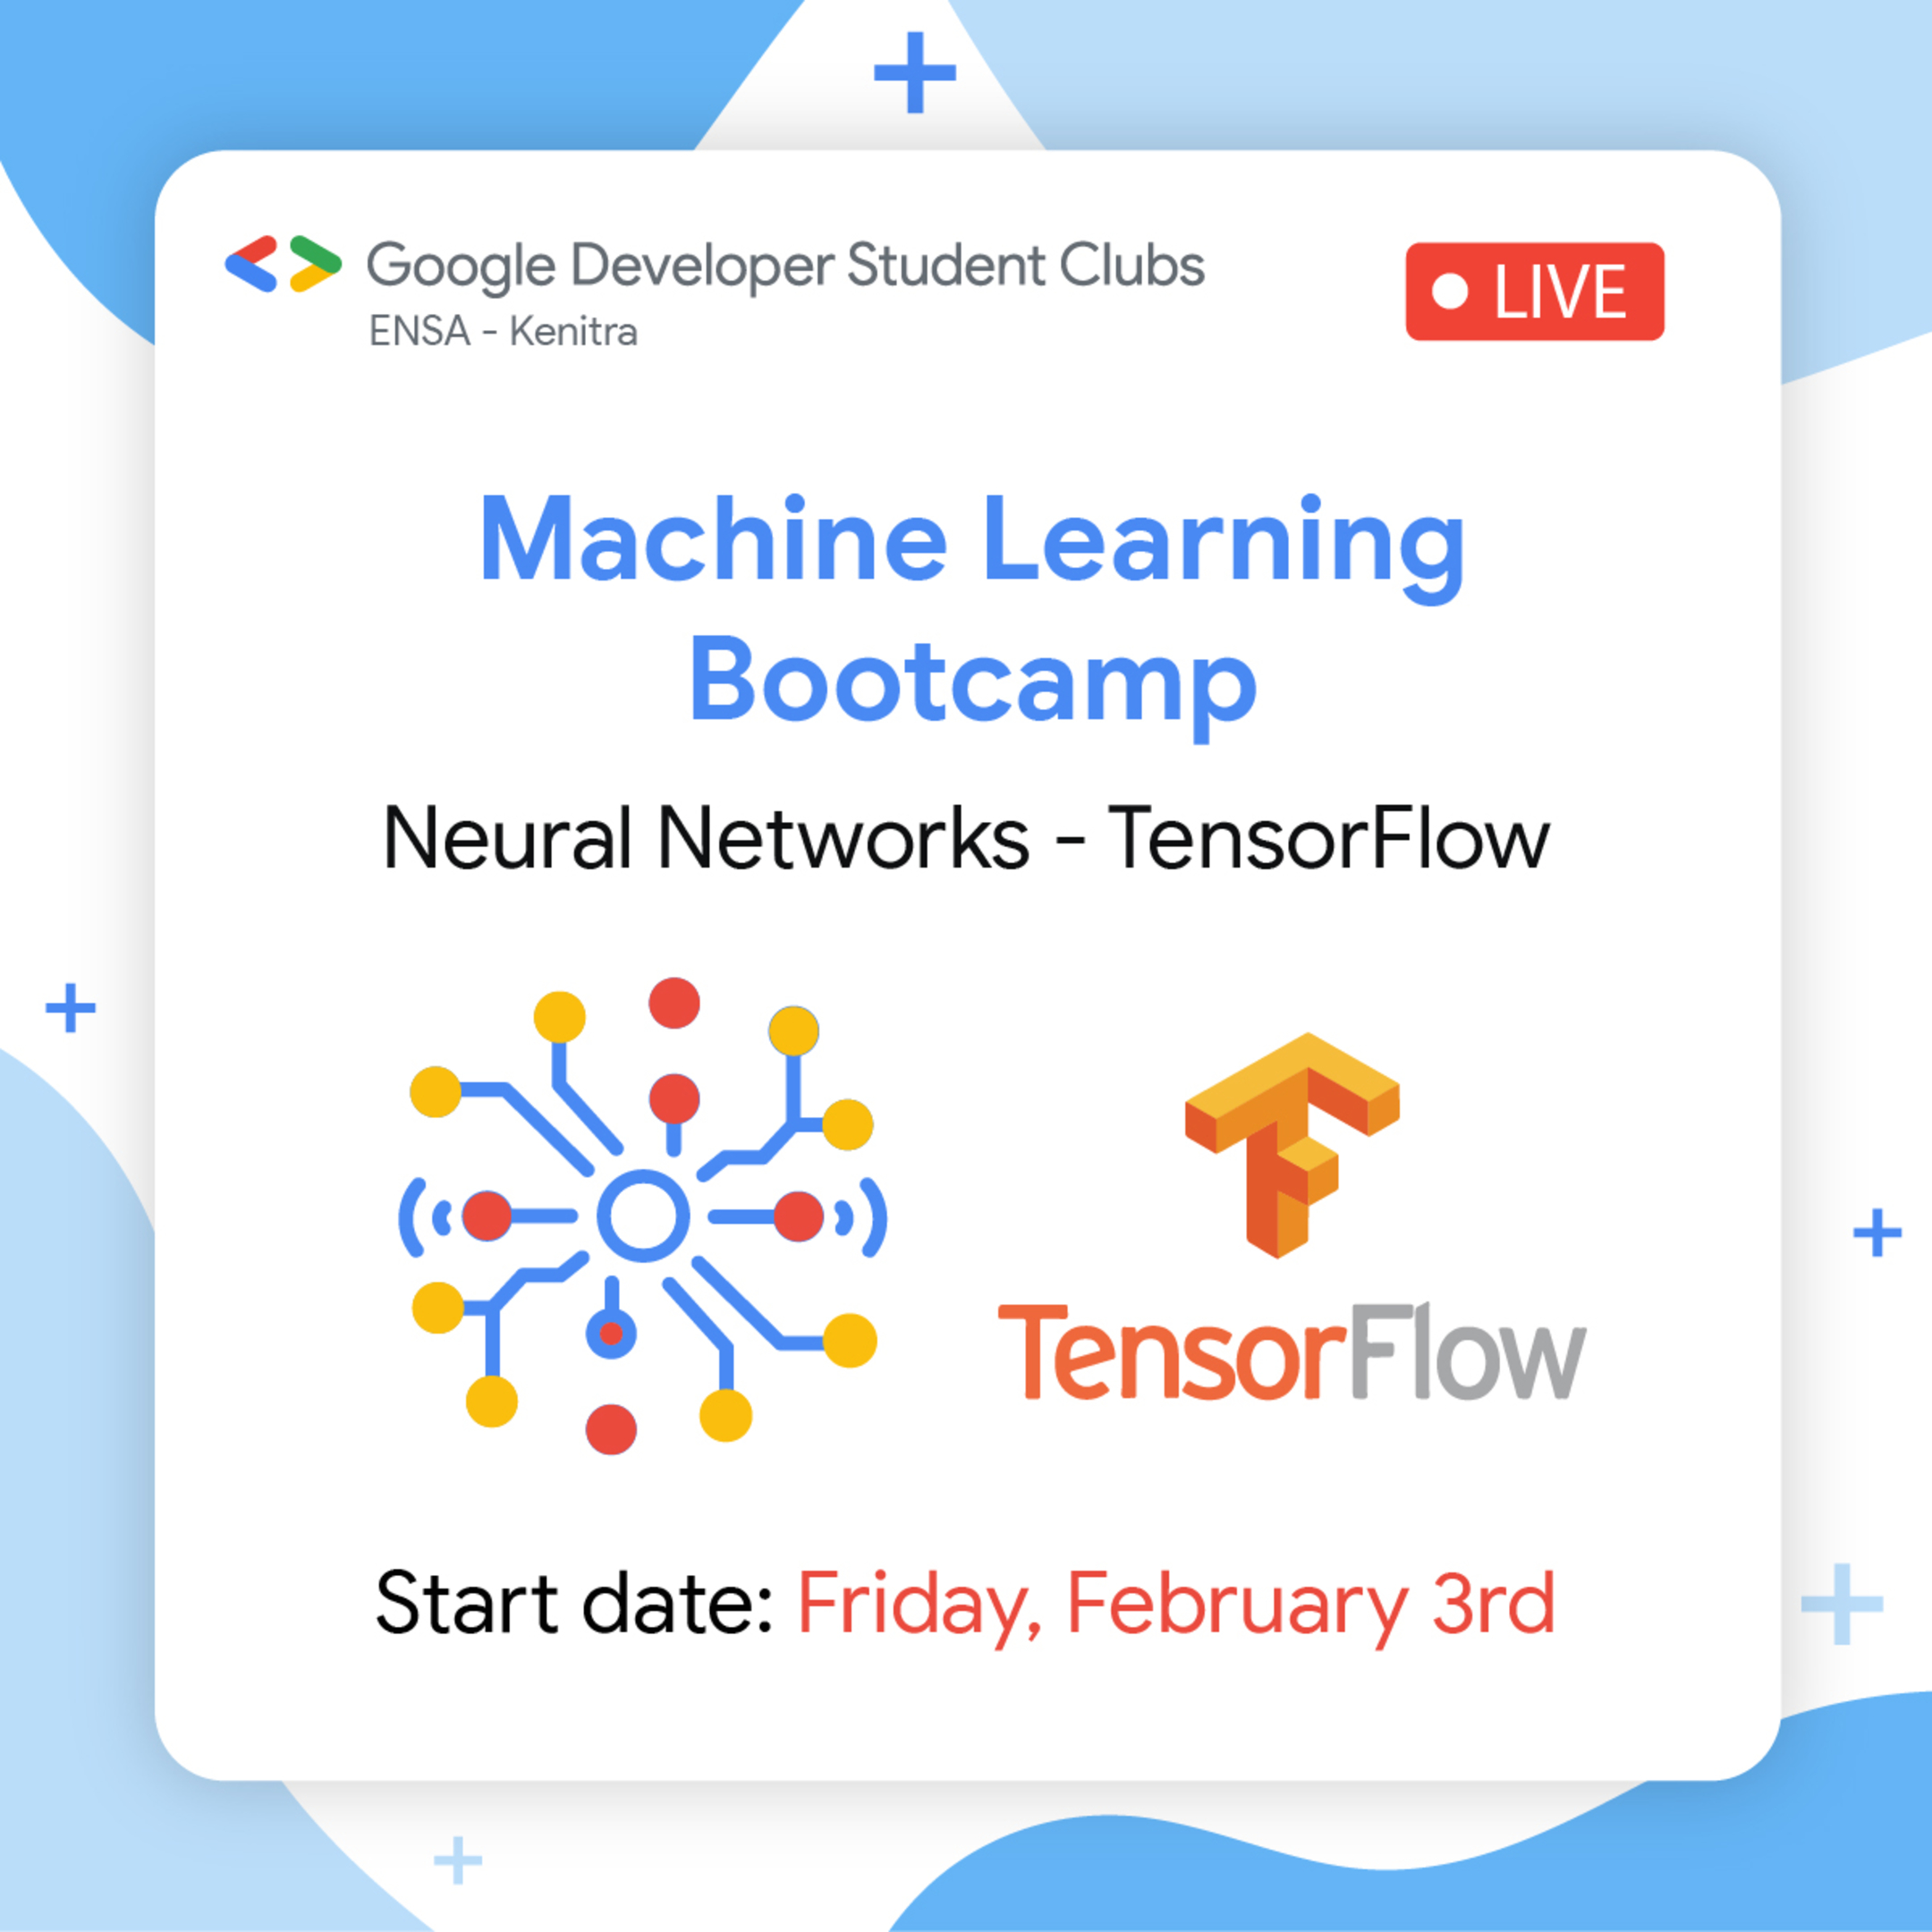 See ML Bootcamp TensorFlow Core Learning Algorithms (Linear